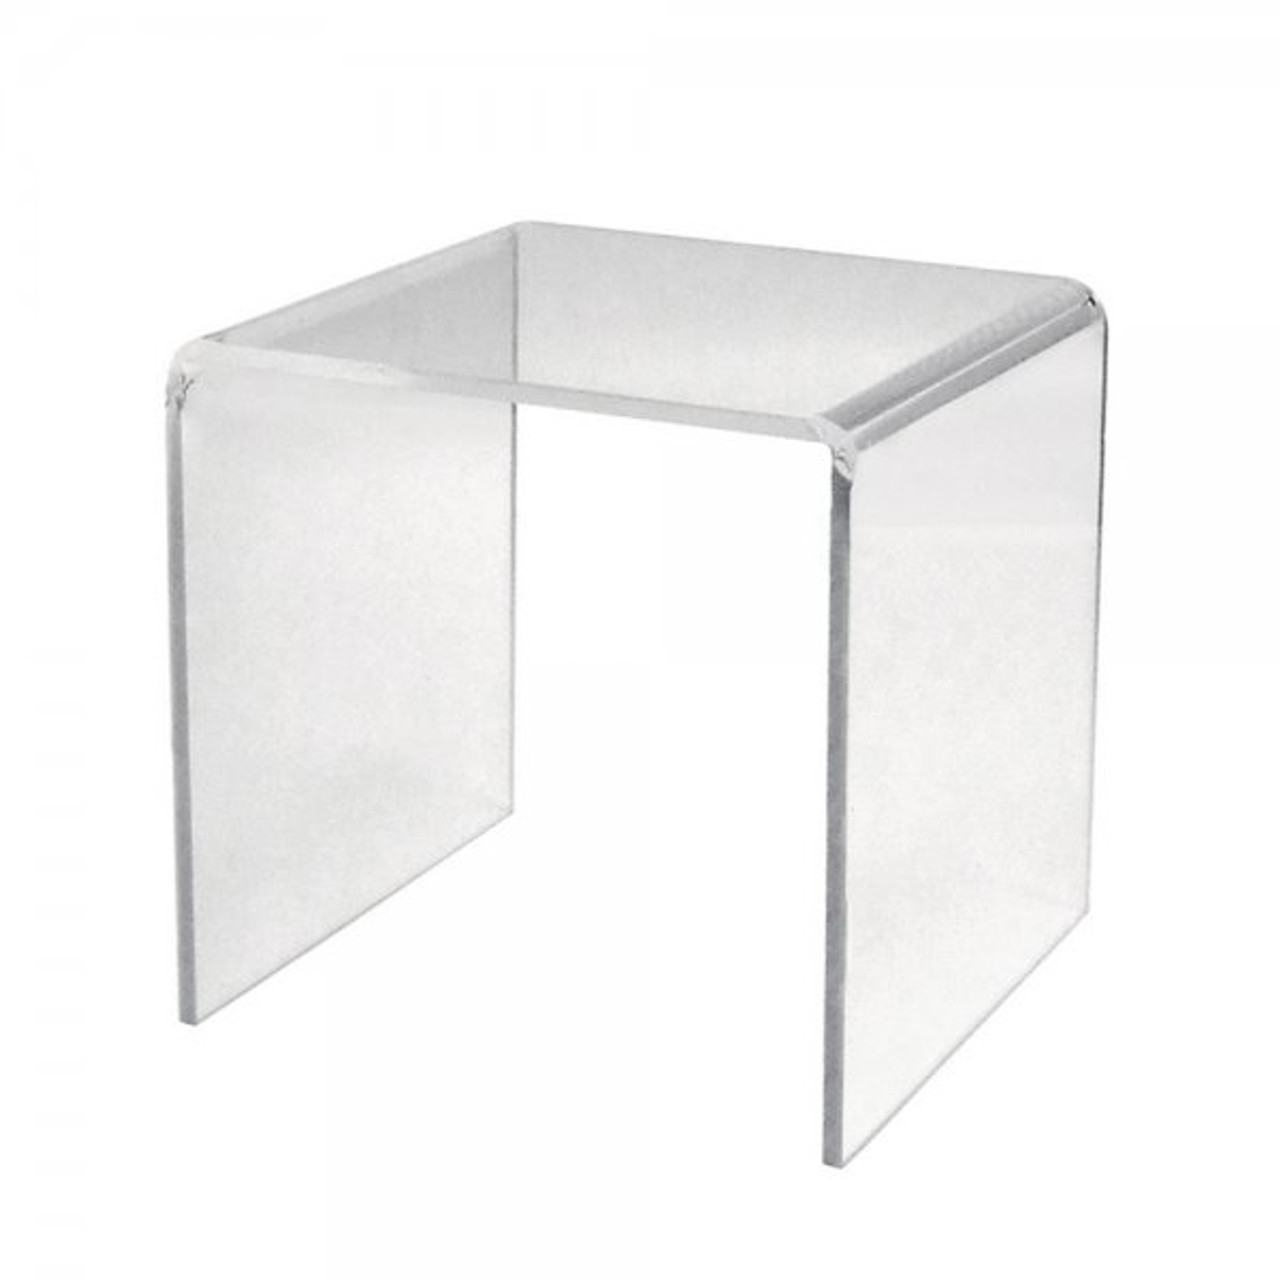 10"x10"x10" Square Clear Acrylic Individual Risers